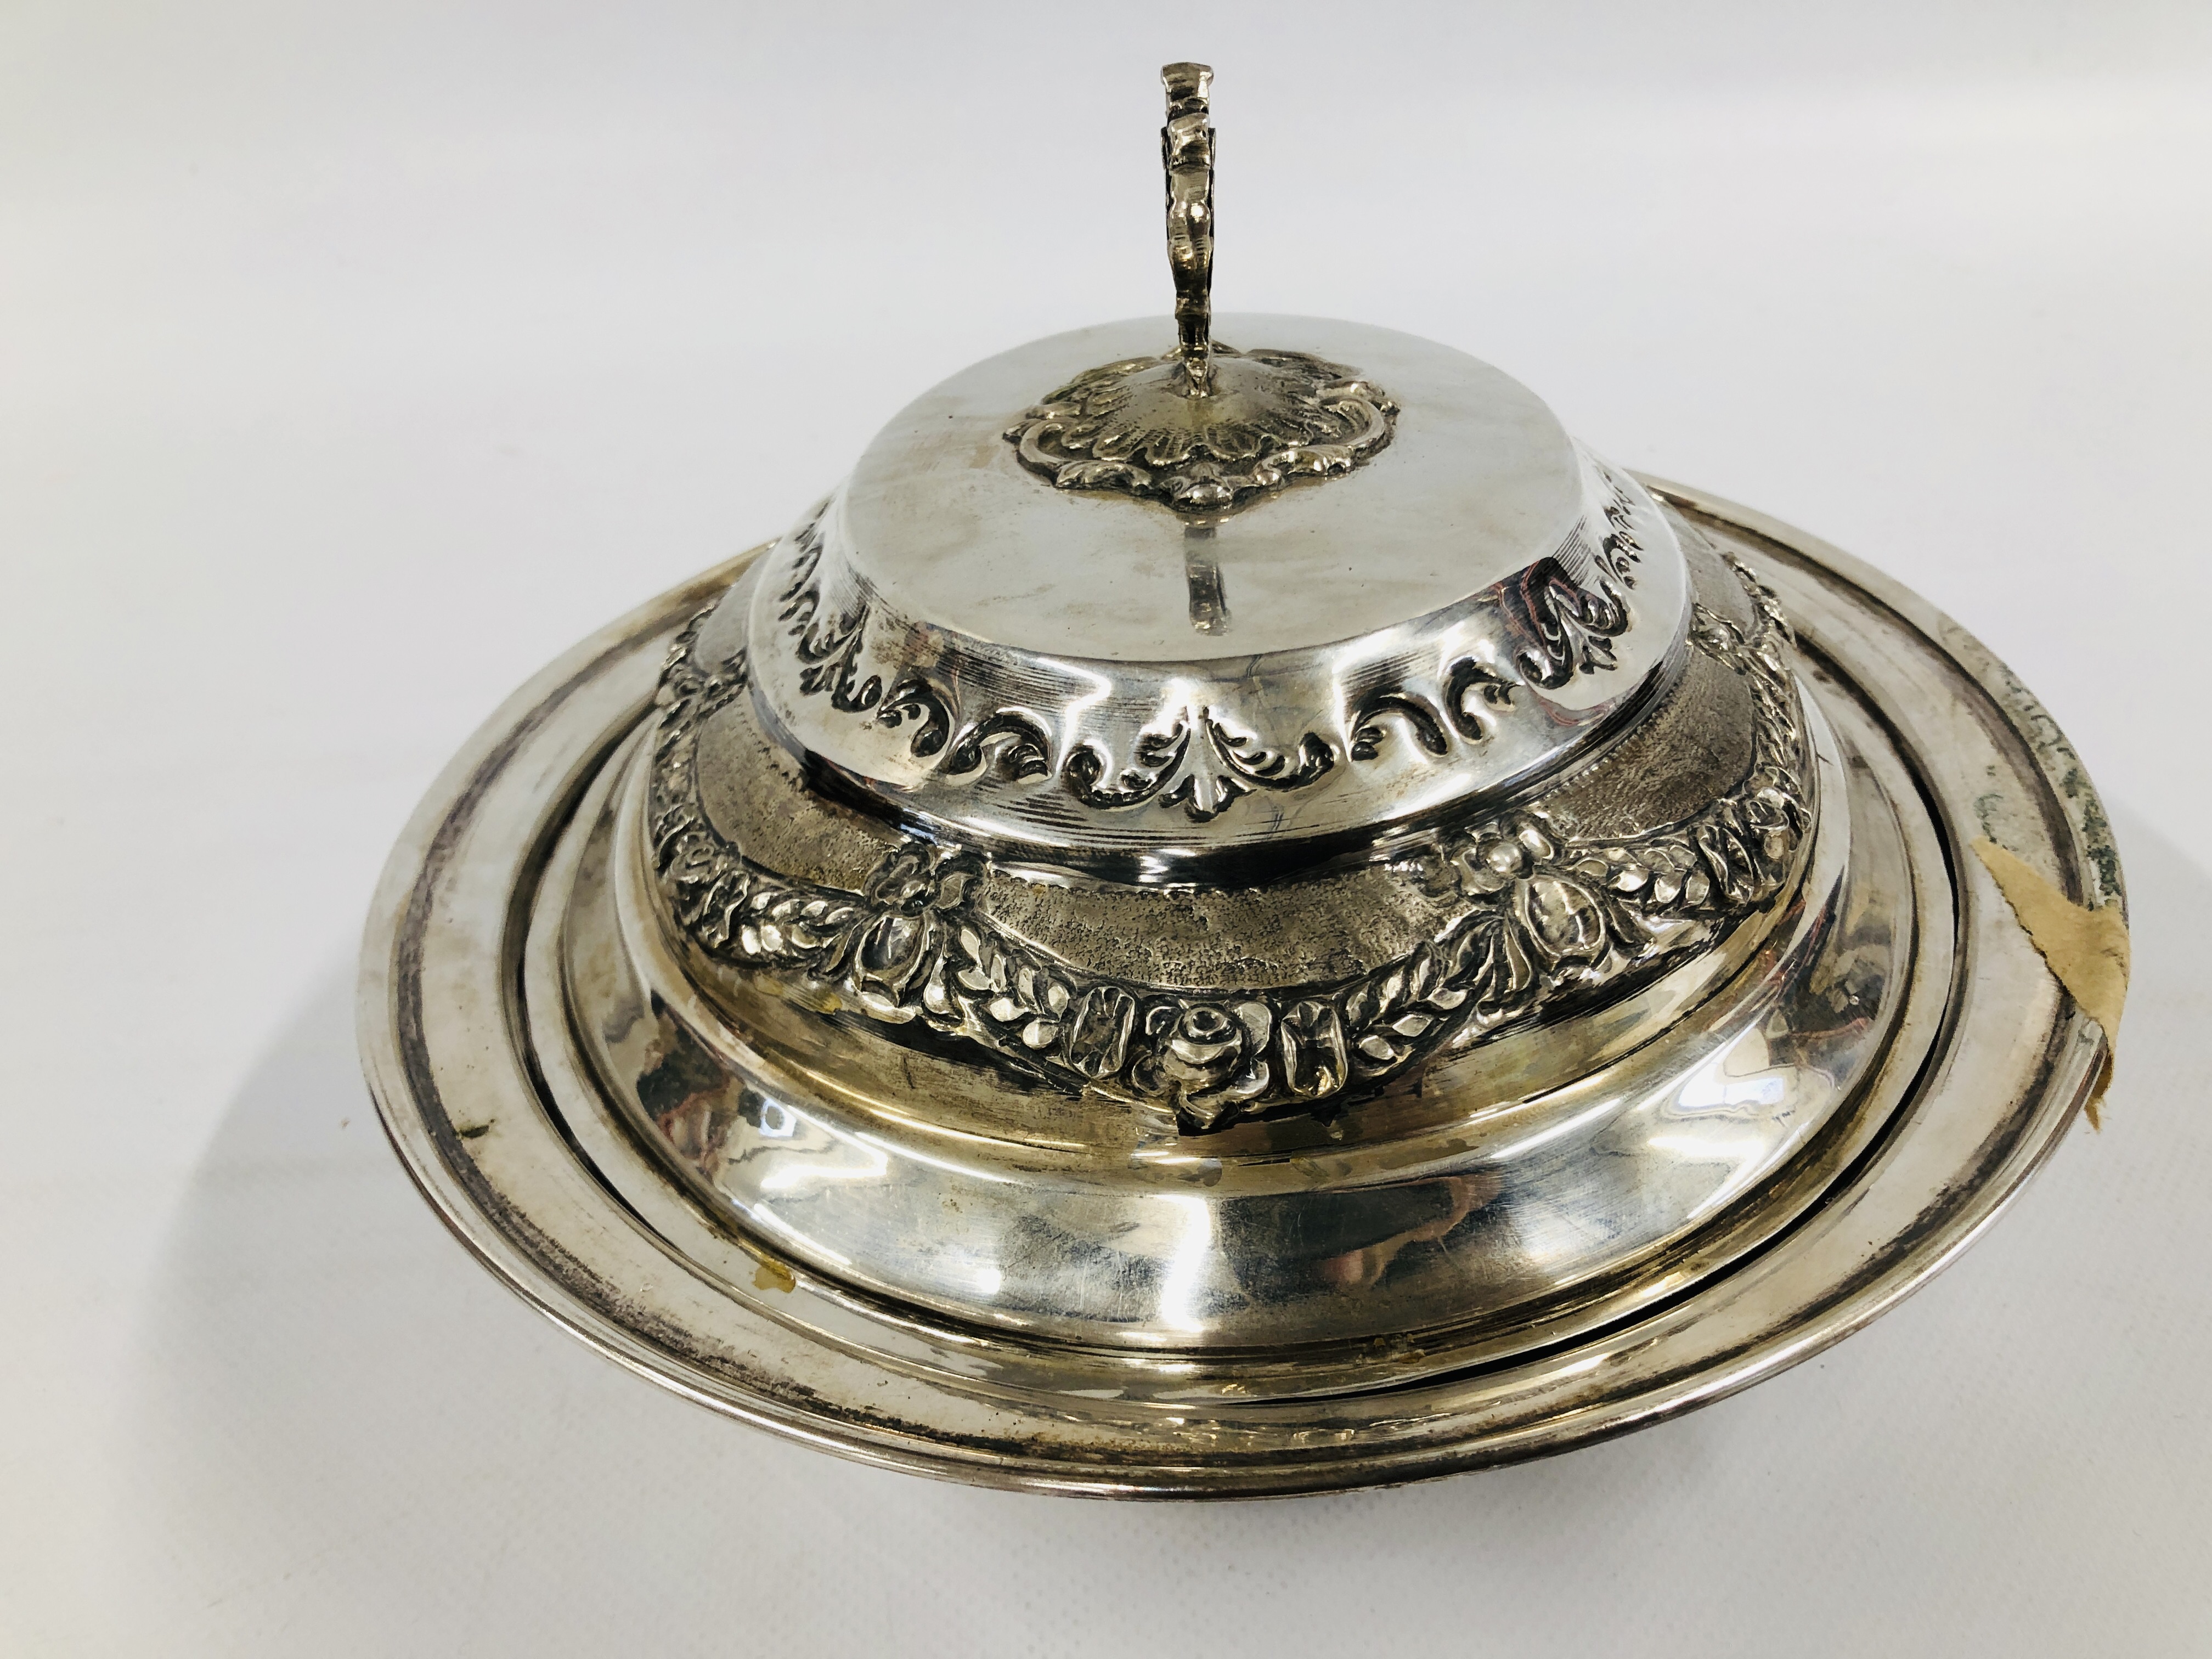 A CONTINENTAL SILVER OVAL TUREEN AND COVER, DECORATED WITH GARLANDS, BASE STAMPED 900, L 30. - Image 4 of 13